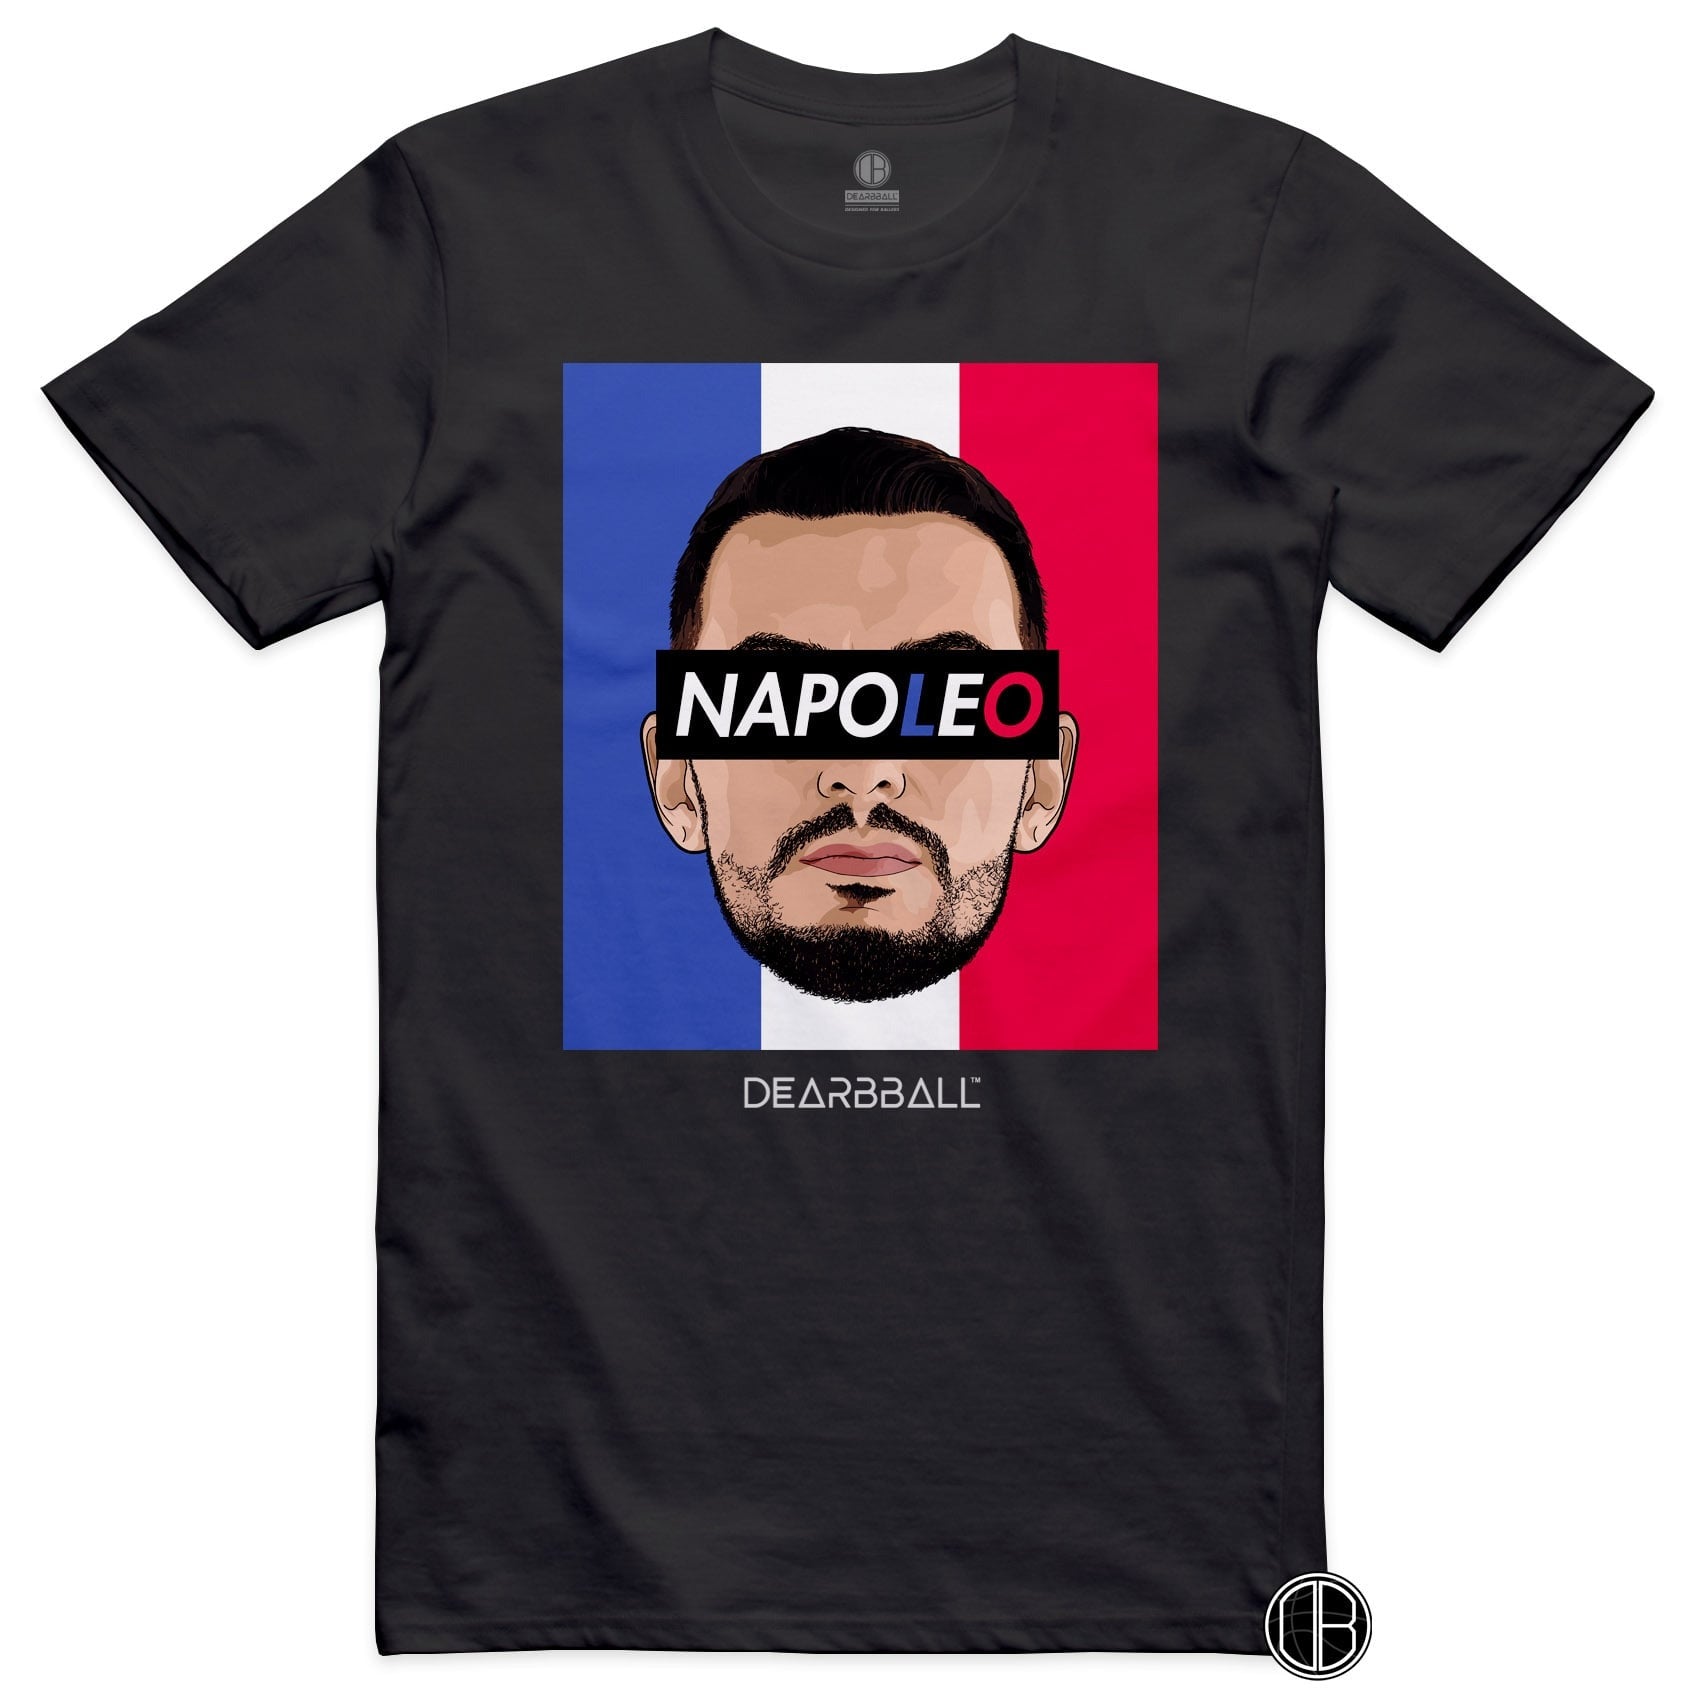 DearBBall Pack 3 T-Shirts - NAPOLEO Edition